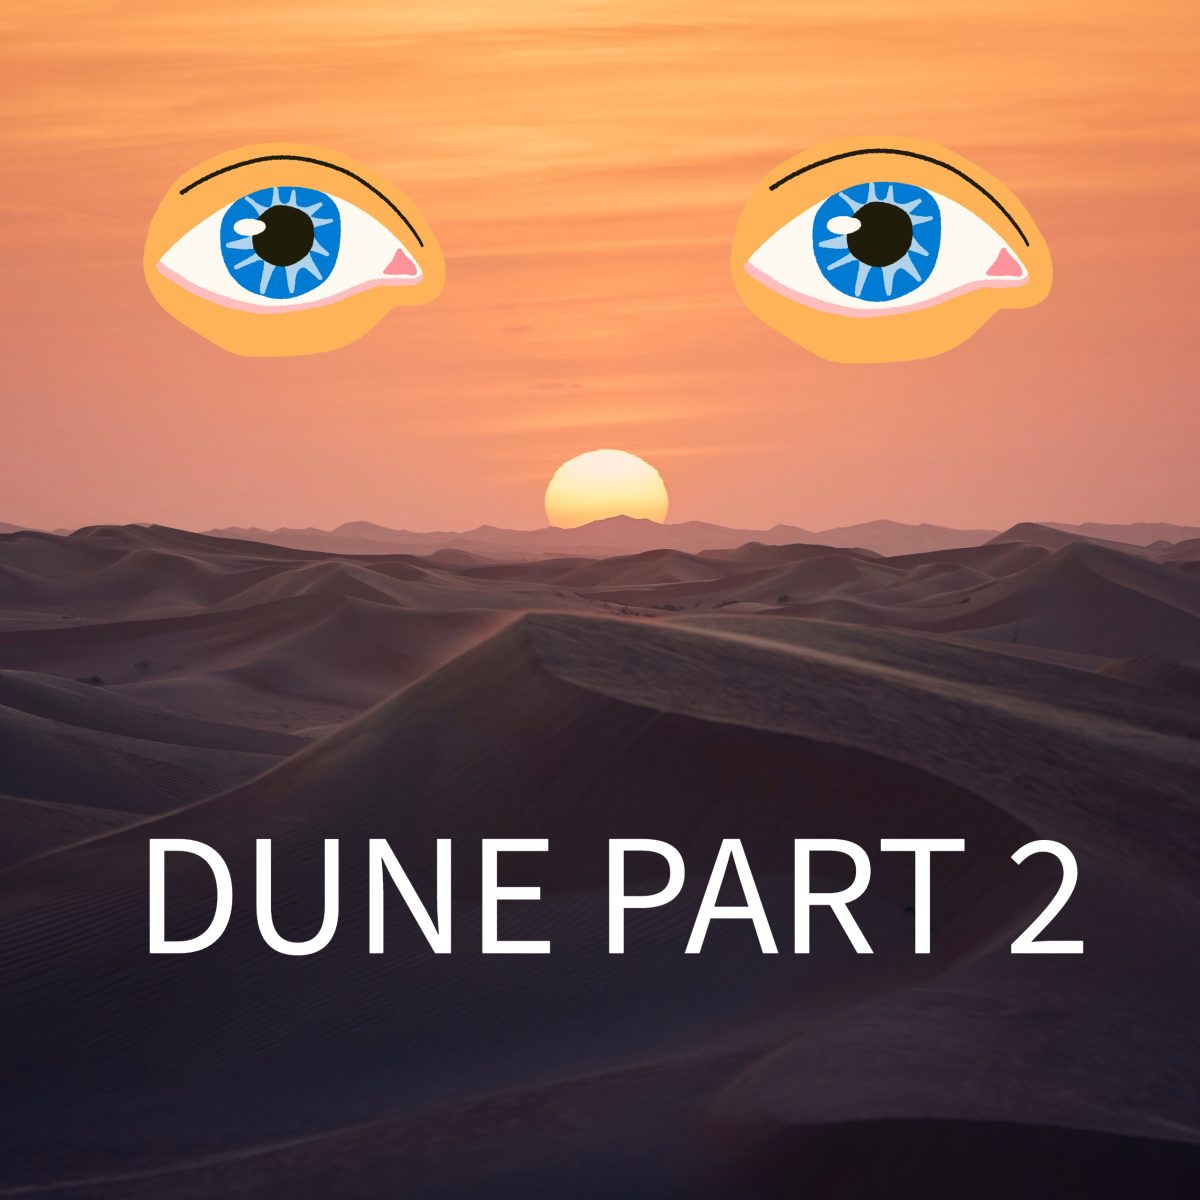 Dune+Part+Two+movie+of+the+year